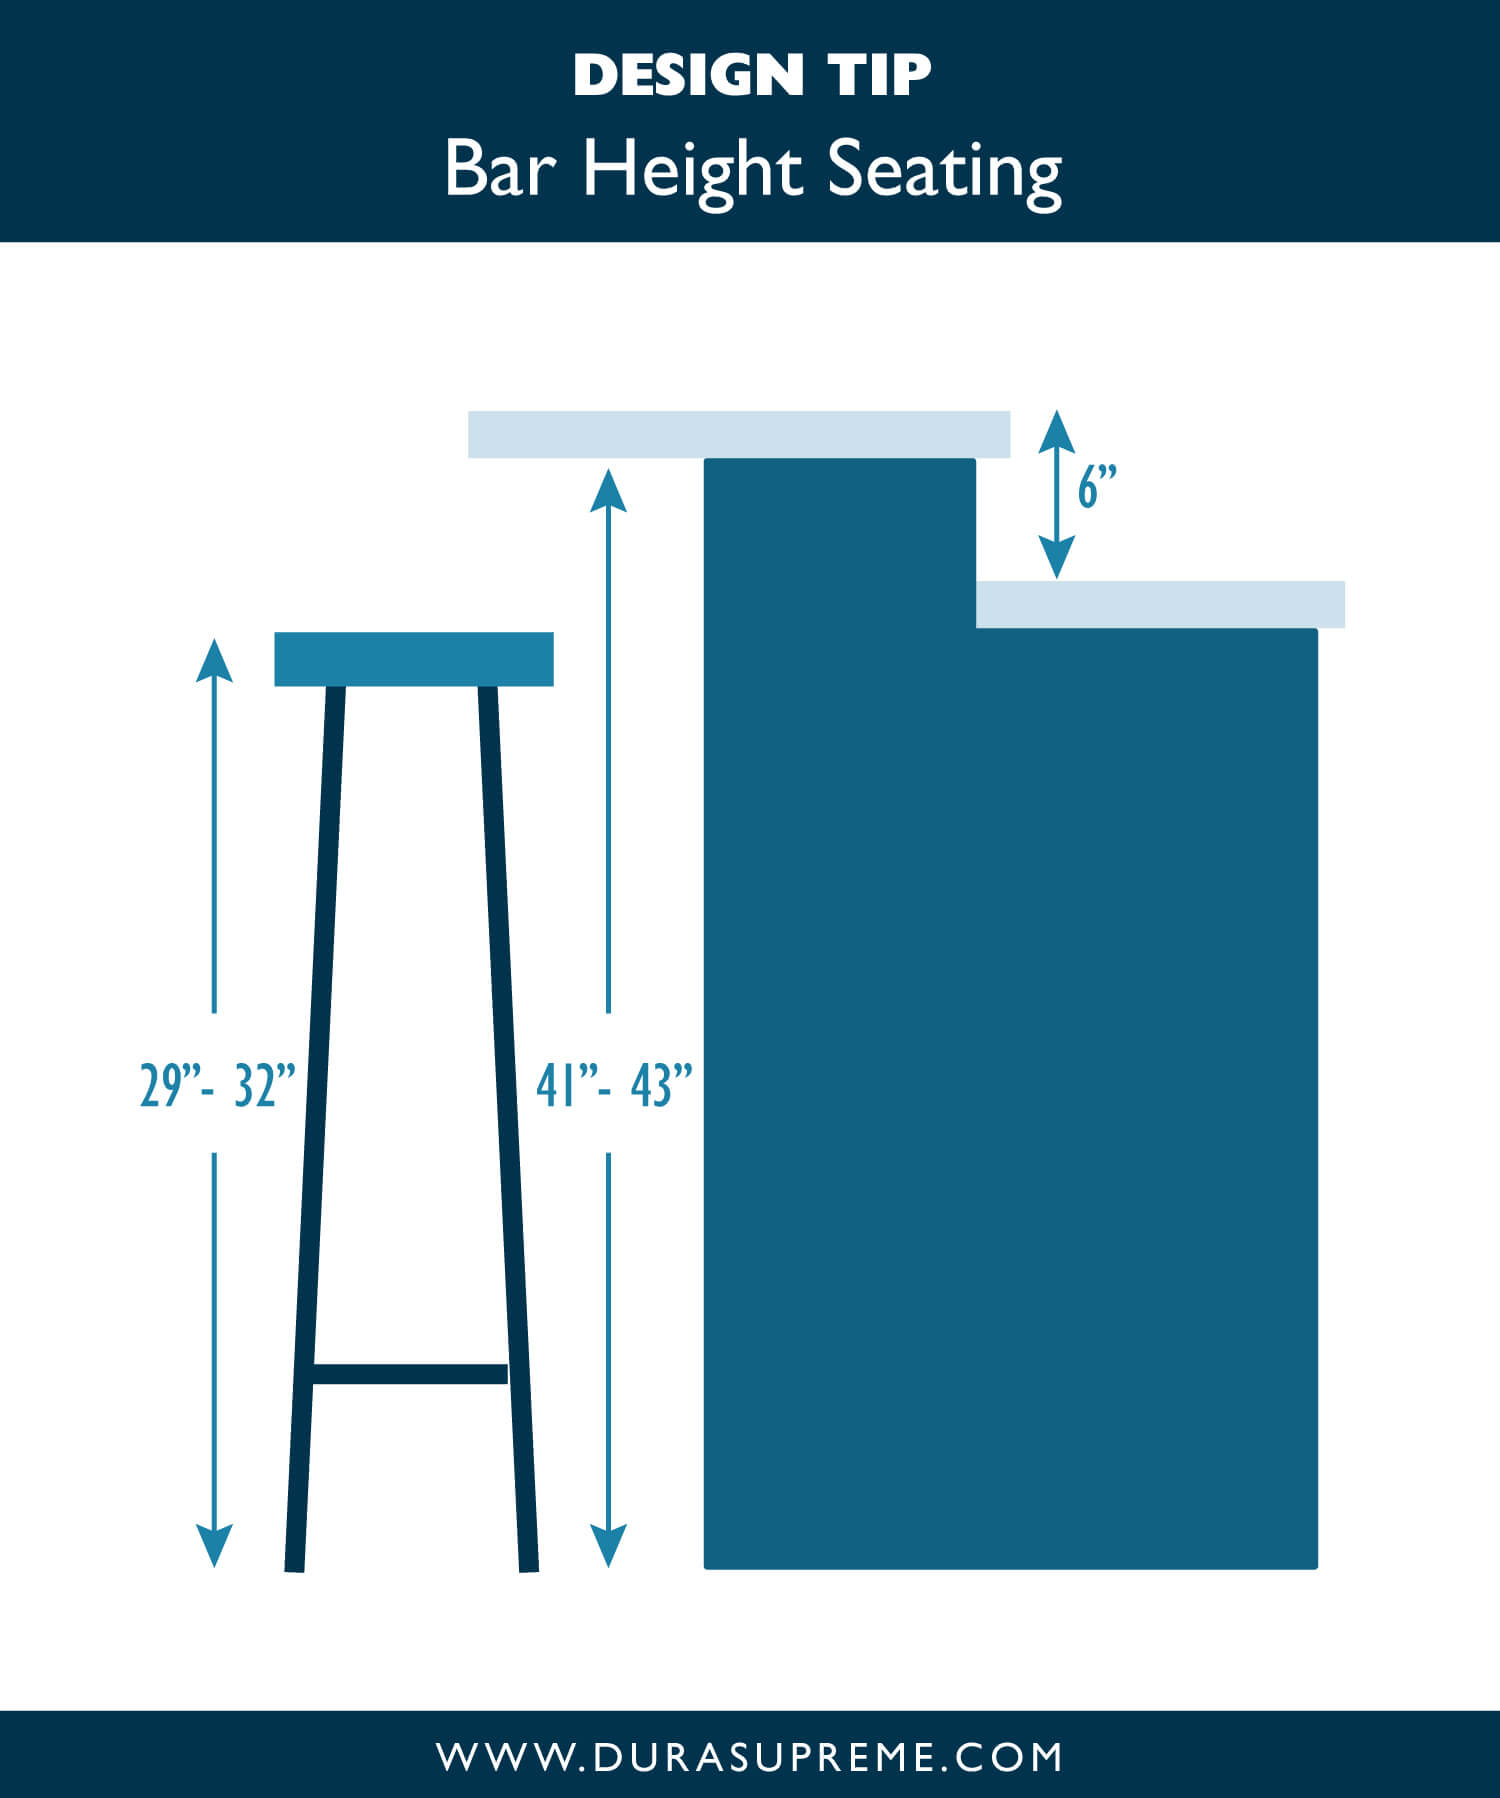 Kitchen Design Tip: Bar Height Seating for the Kitchen Island or Peninsula